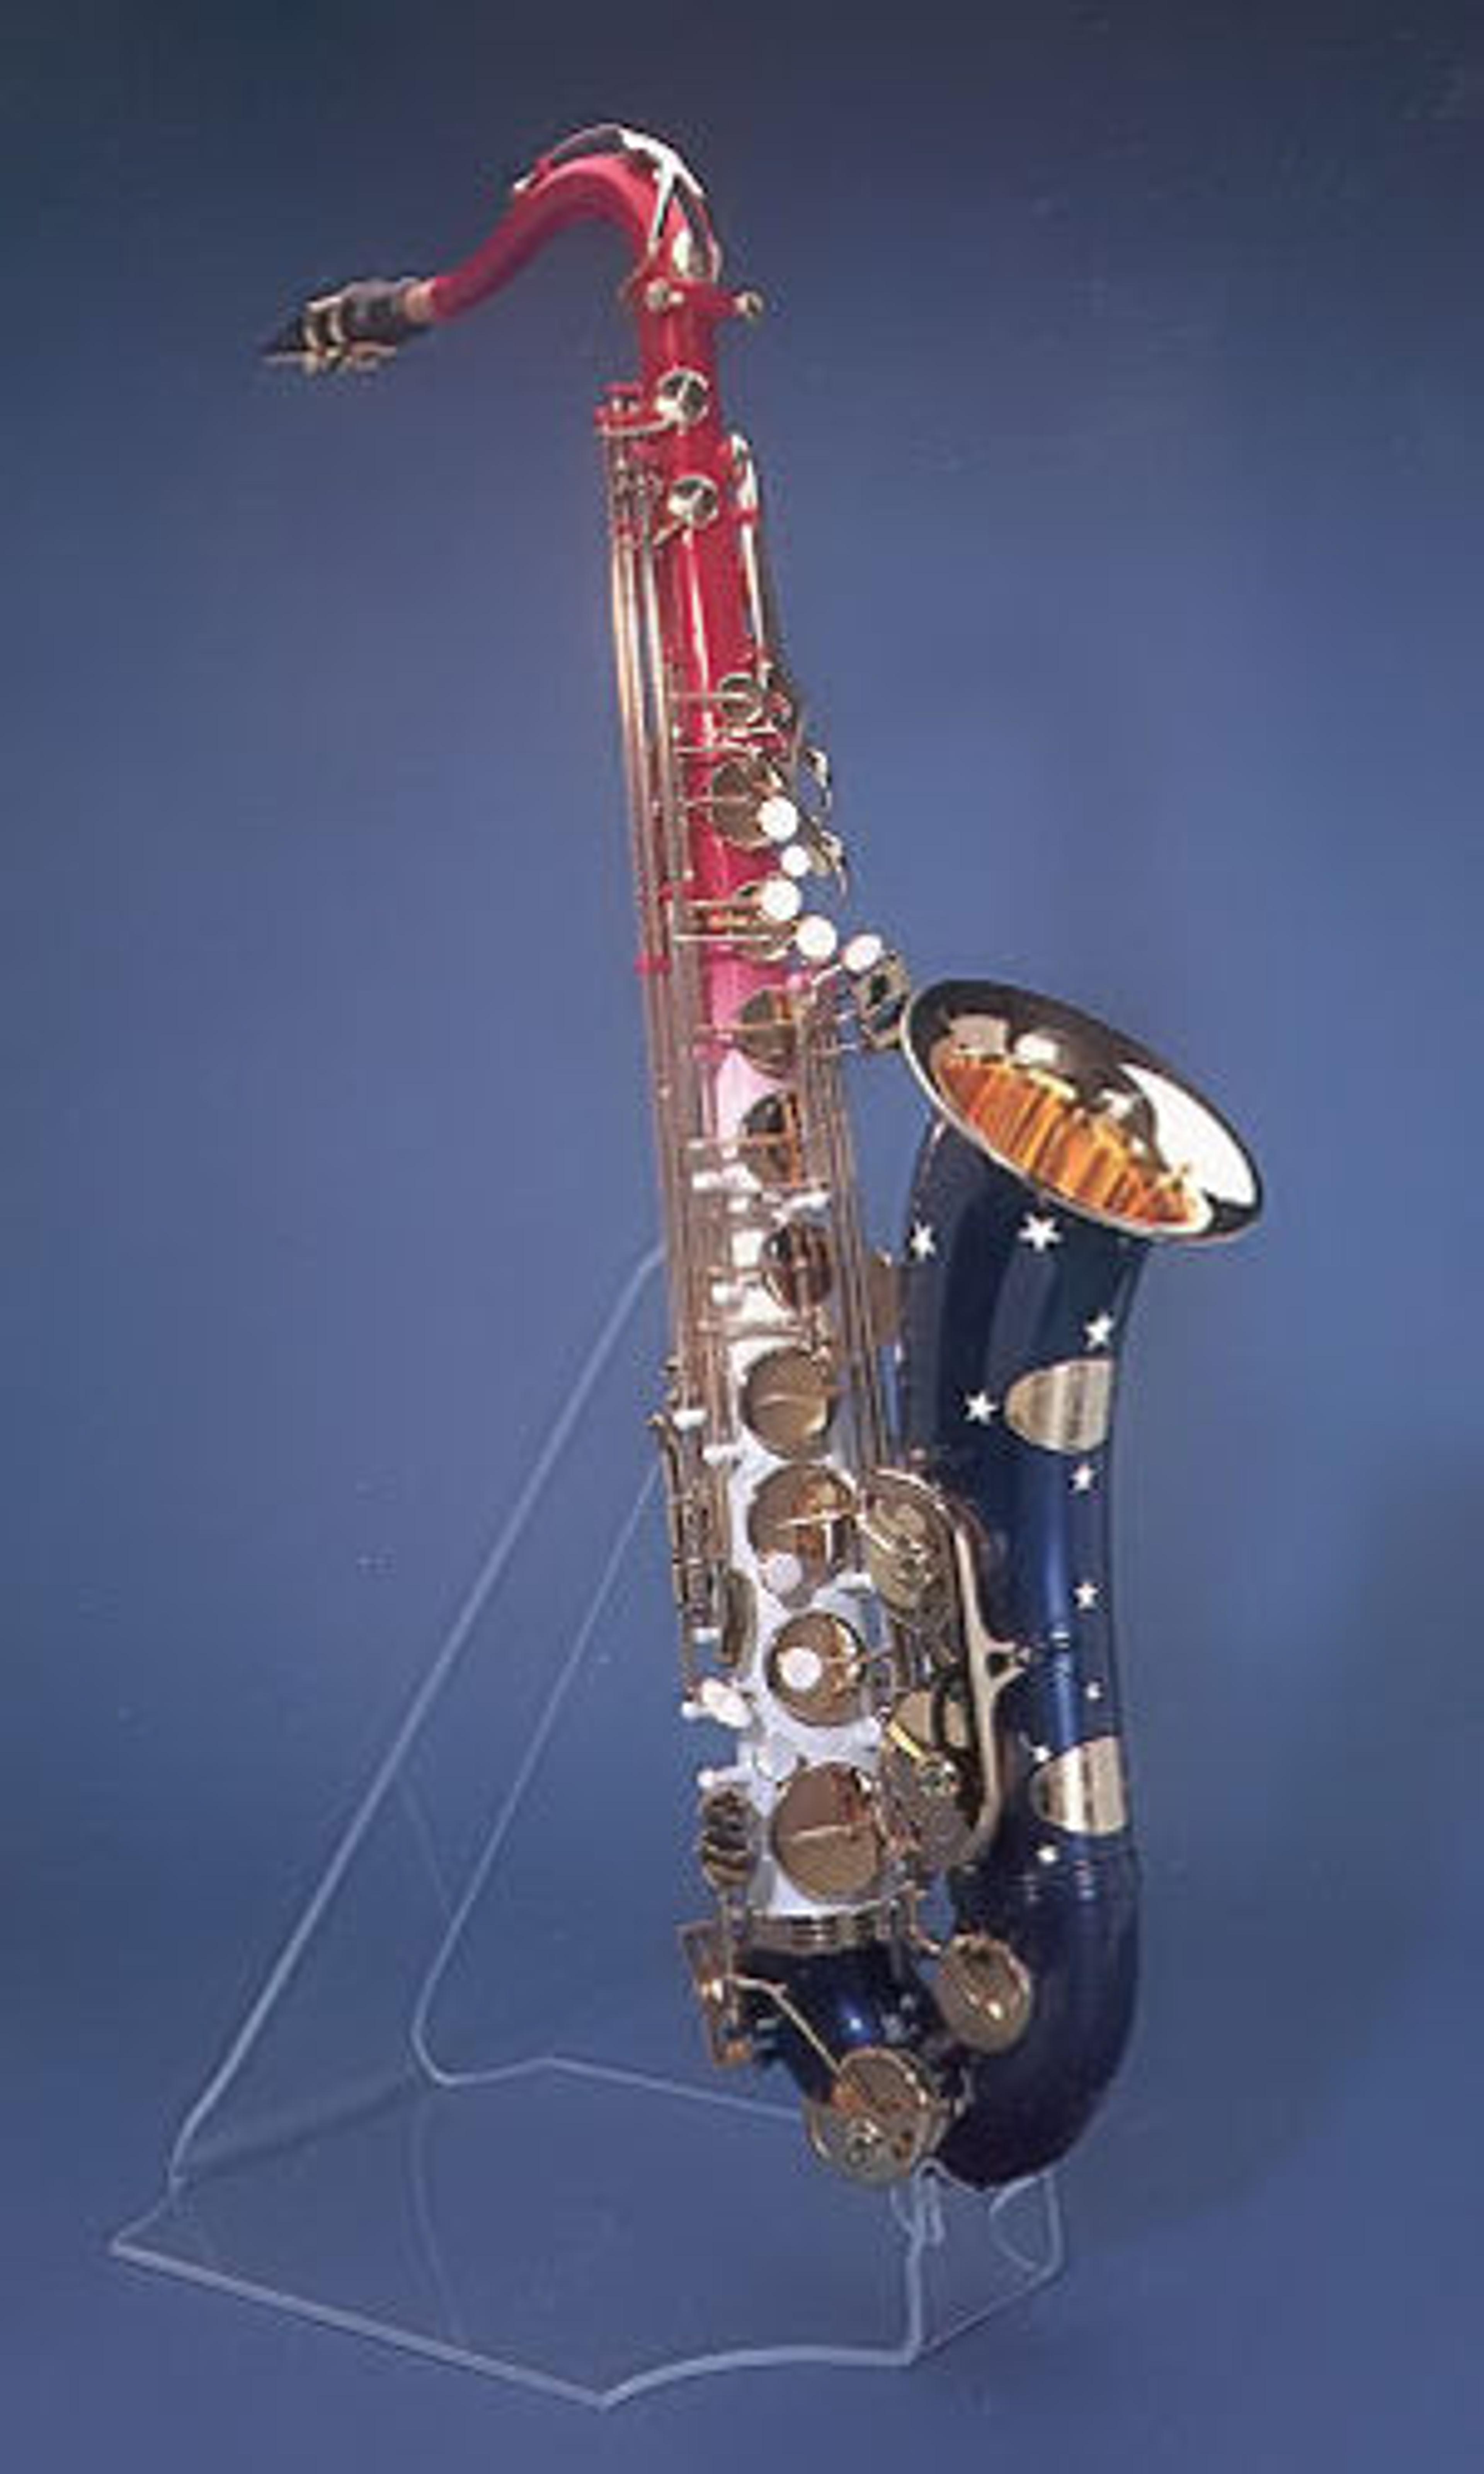 L.A. Sax Company, Barrington, Illinois. Tenor saxophone, 1993. No. 1 of a limited edition of 150 Presidential Model tenor saxophones. Presented to President Bill Clinton on Monday, May 16th, 1994, in the White House Oval Office. Gift of Bill Clinton, President of the United States, 1994 (NMM5727)